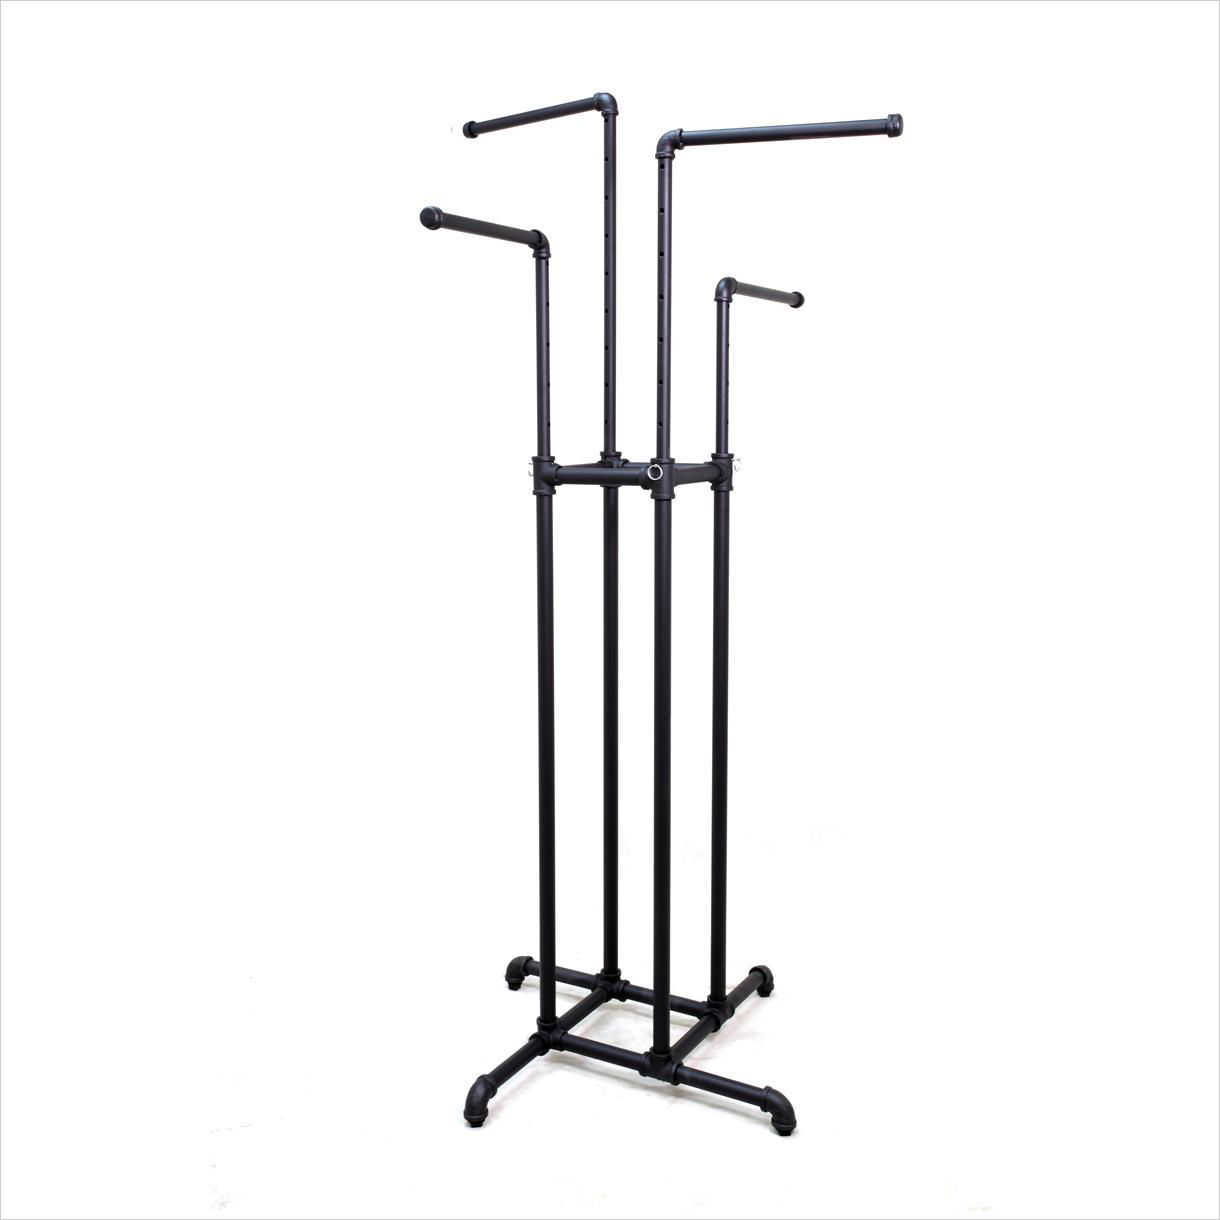 4 way pipeline rack with independently adjustable arms in anthracite grey finish